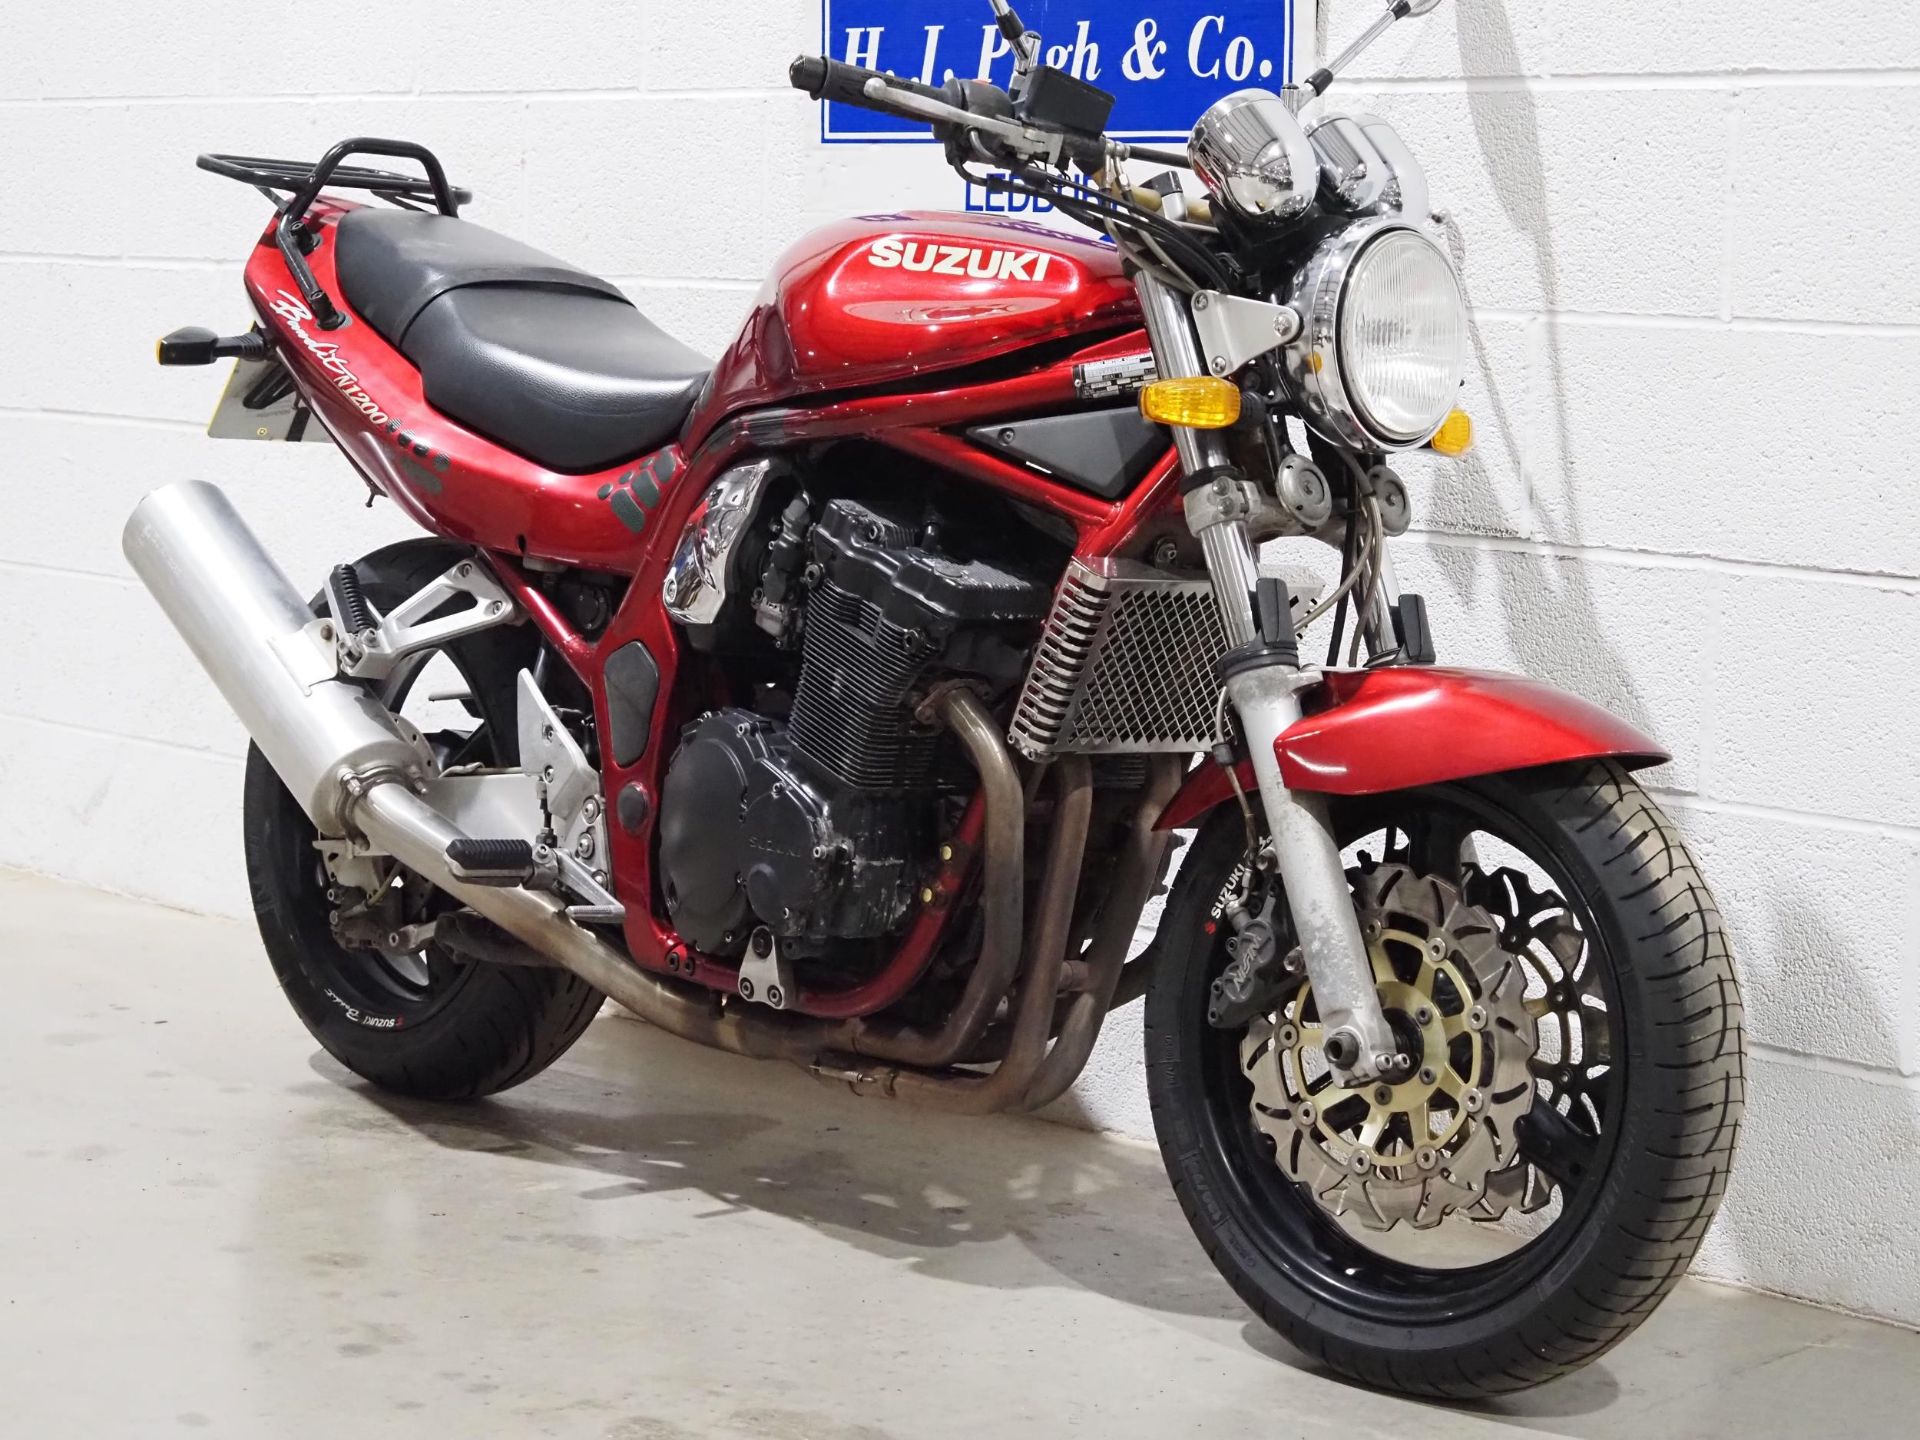 Suzuki GSF1200 Bandit motorcycle. 2000. 1157cc. Runs and rides. MOT until 01.02.05. Comes with MOT - Image 2 of 6